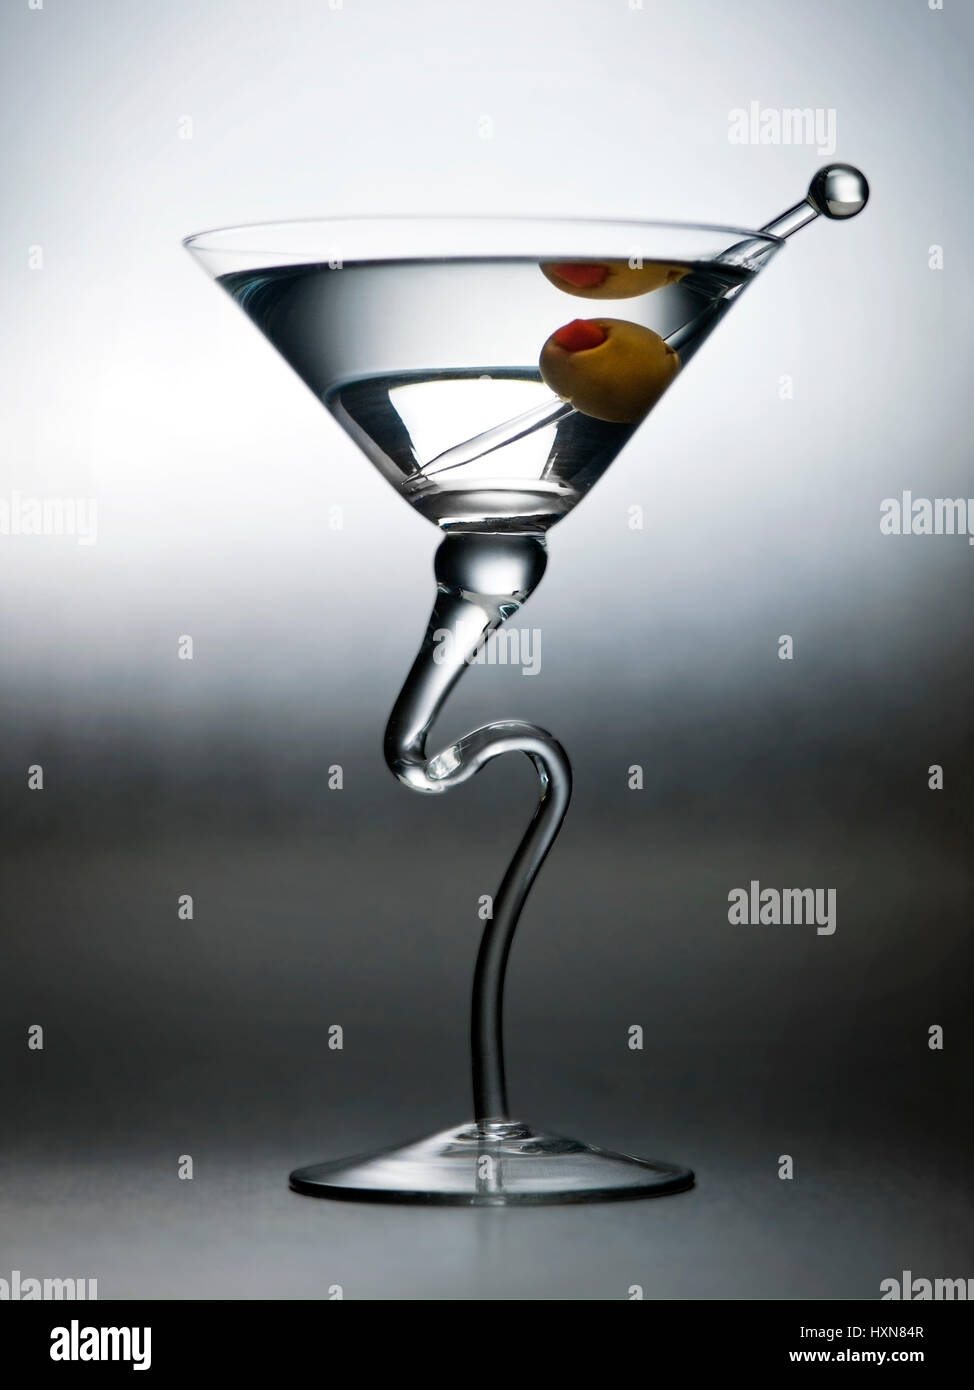 https://c8.alamy.com/comp/HXN84R/dry-martini-beverage-with-olive-and-fancy-glass-HXN84R.jpg